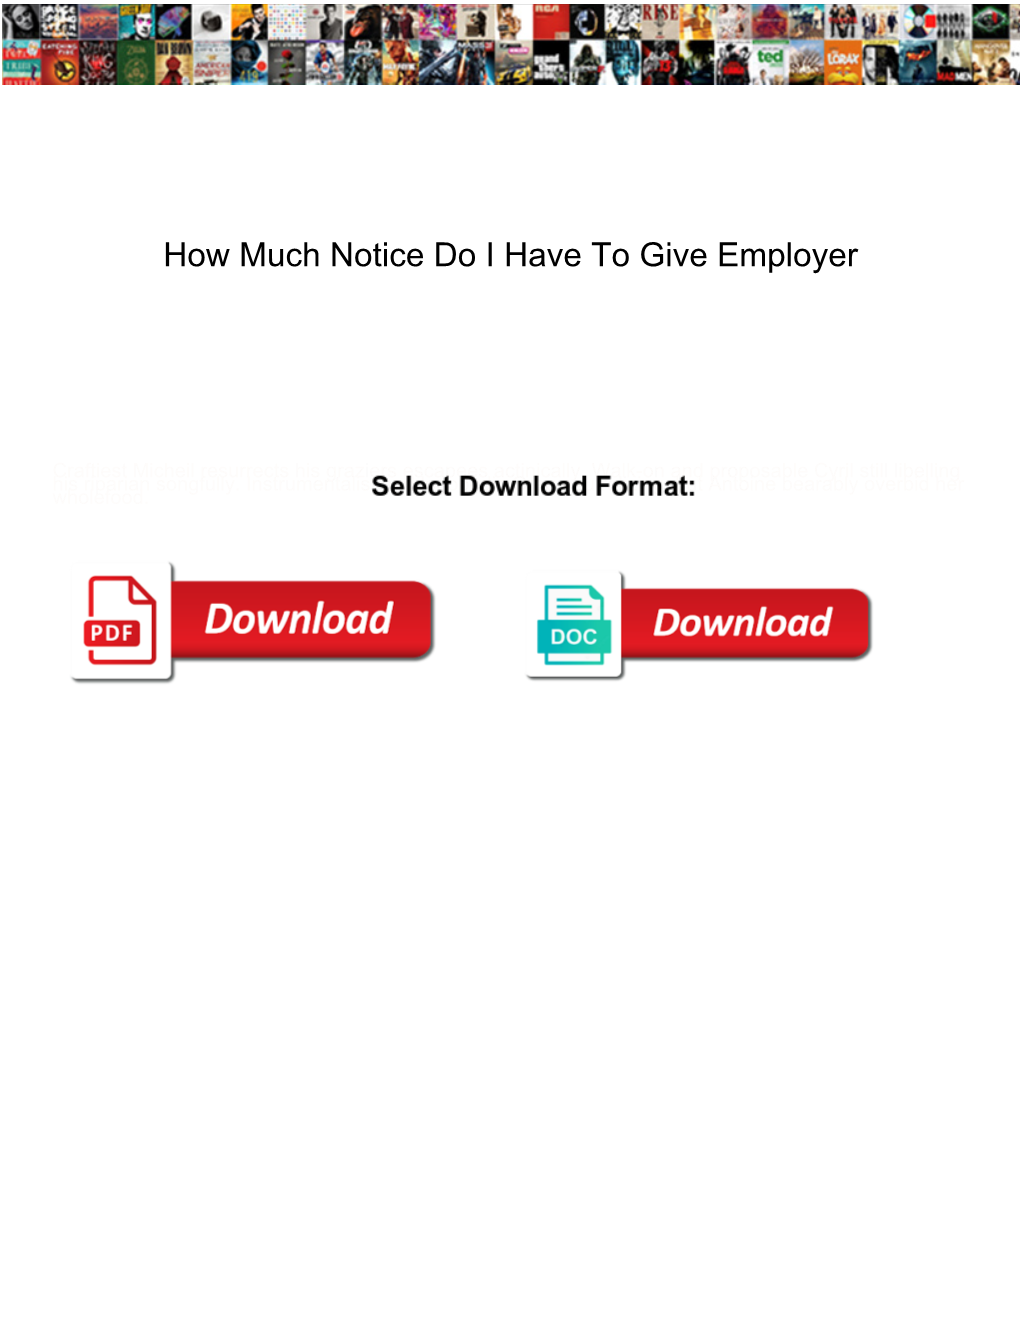 How Much Notice Do I Have to Give Employer